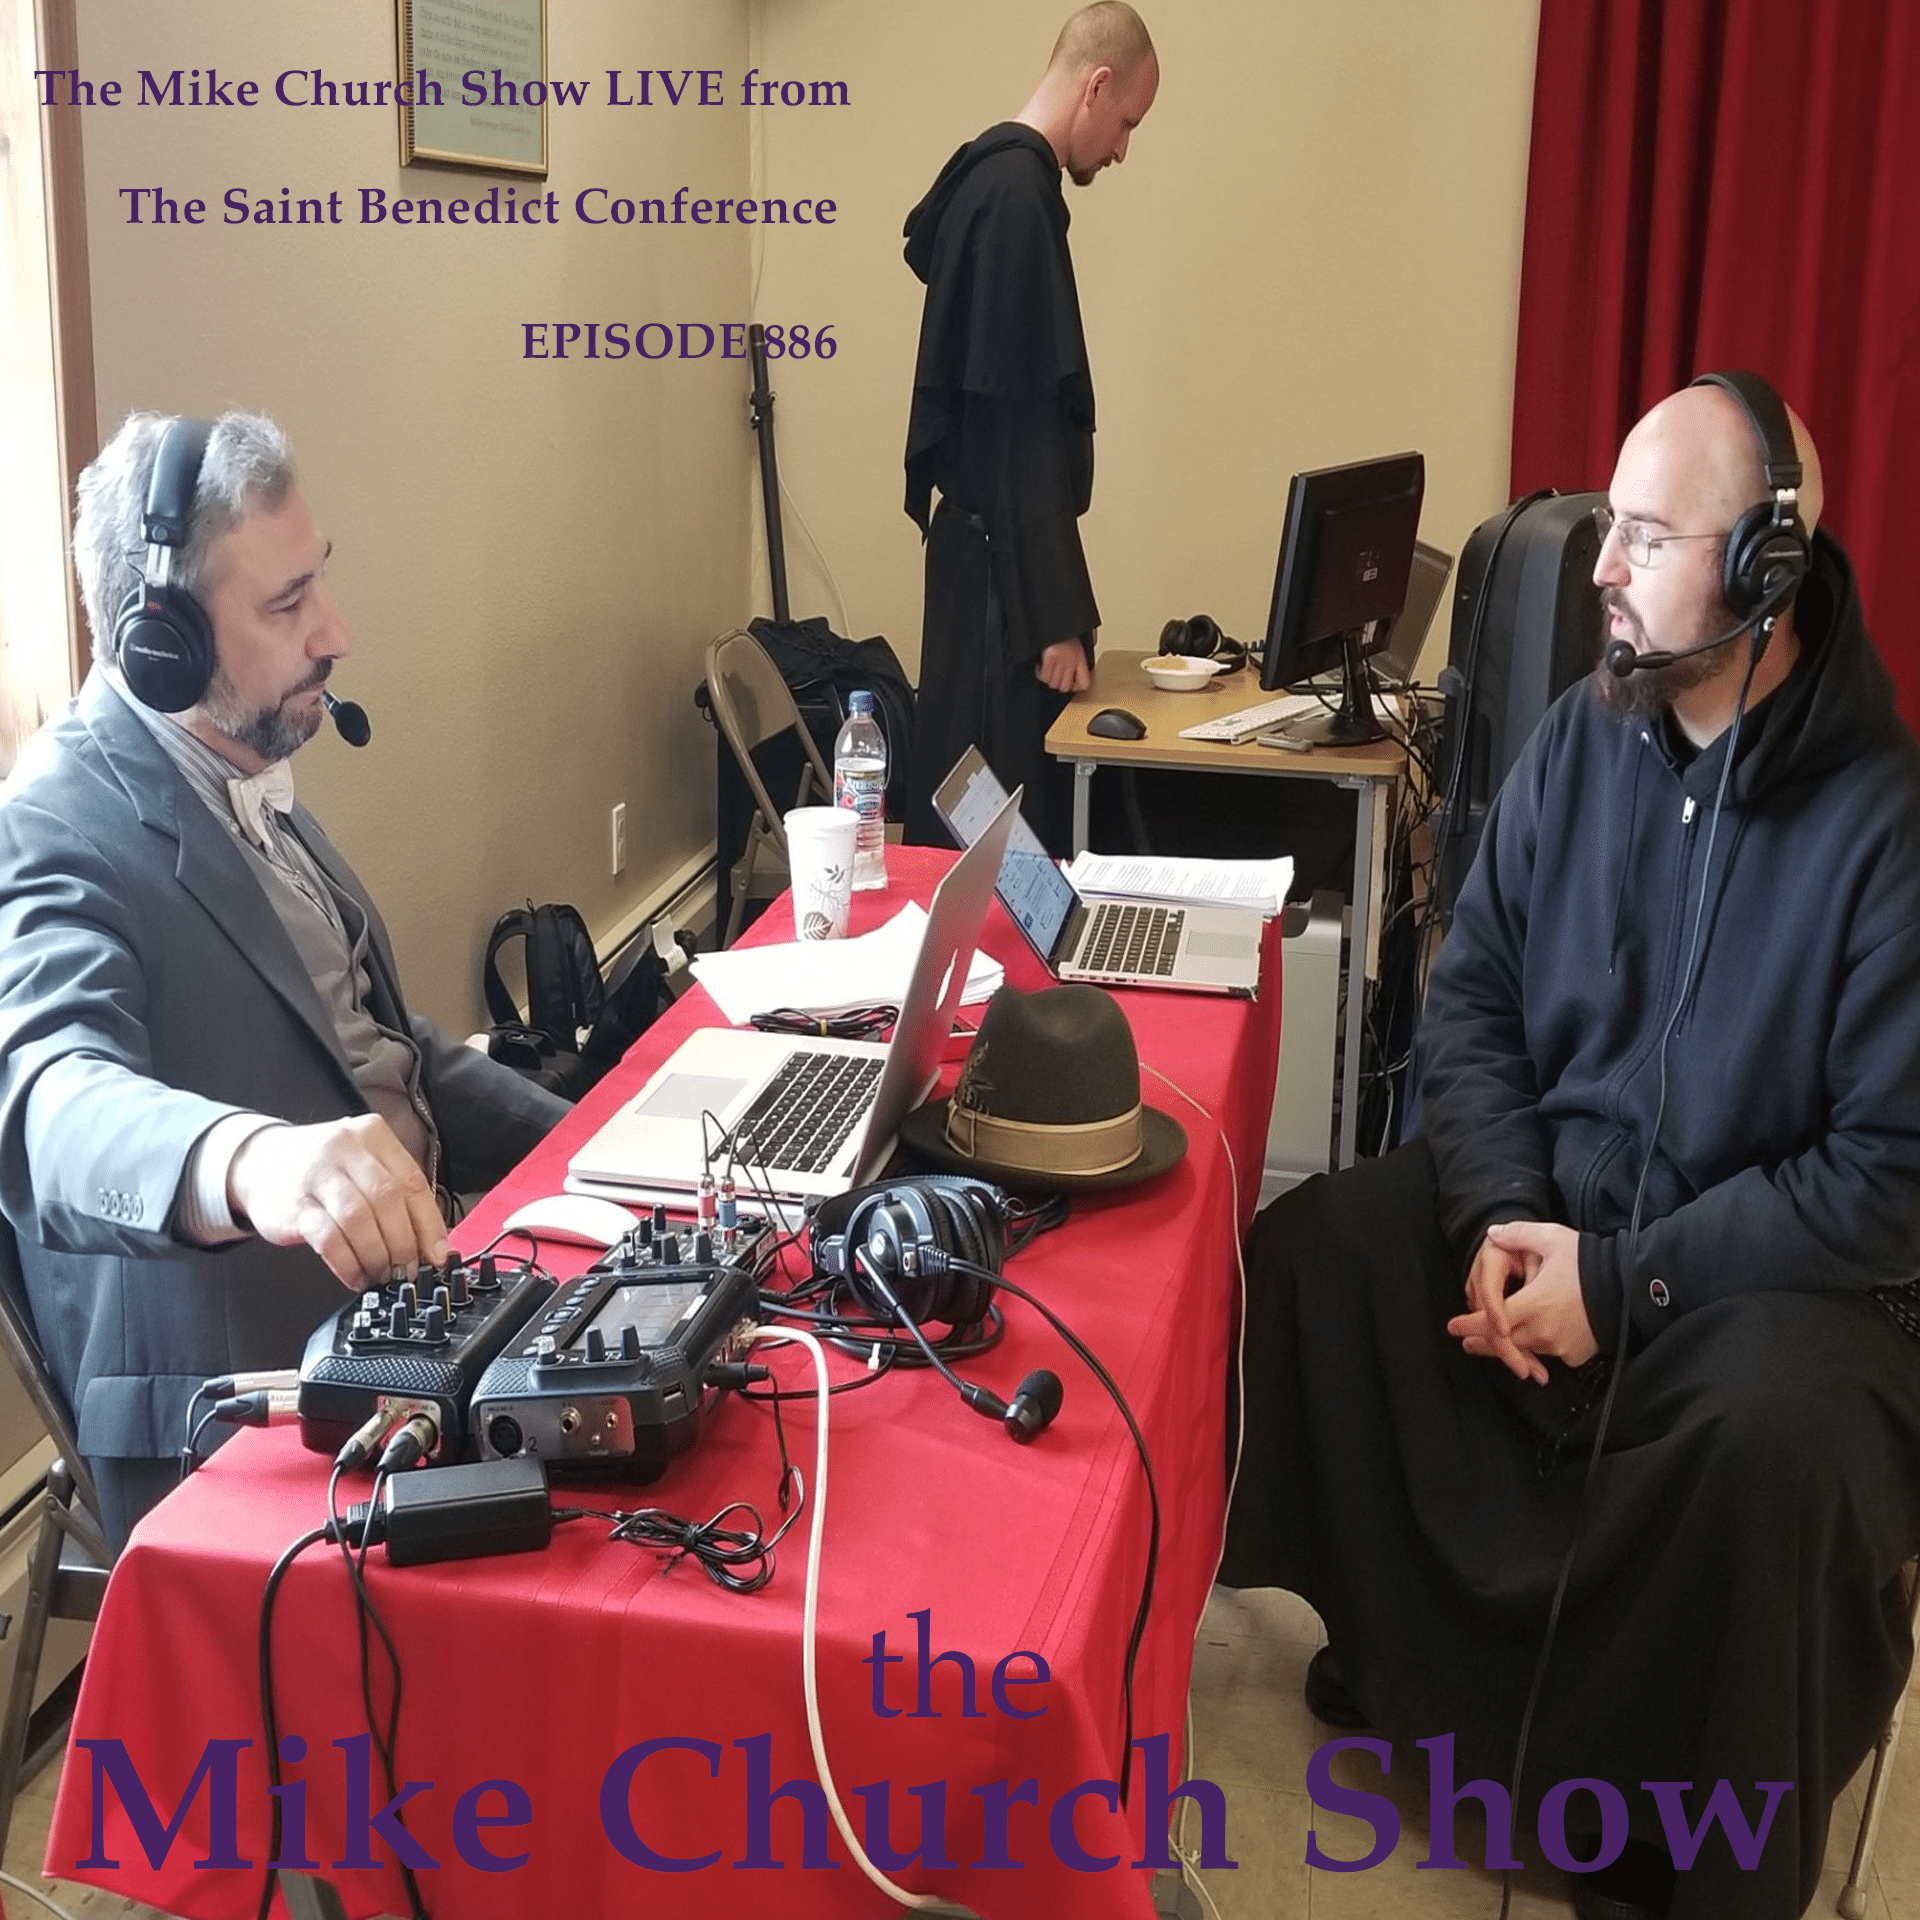 The Mike Church Show LIVE from the Saint Benedict Conference